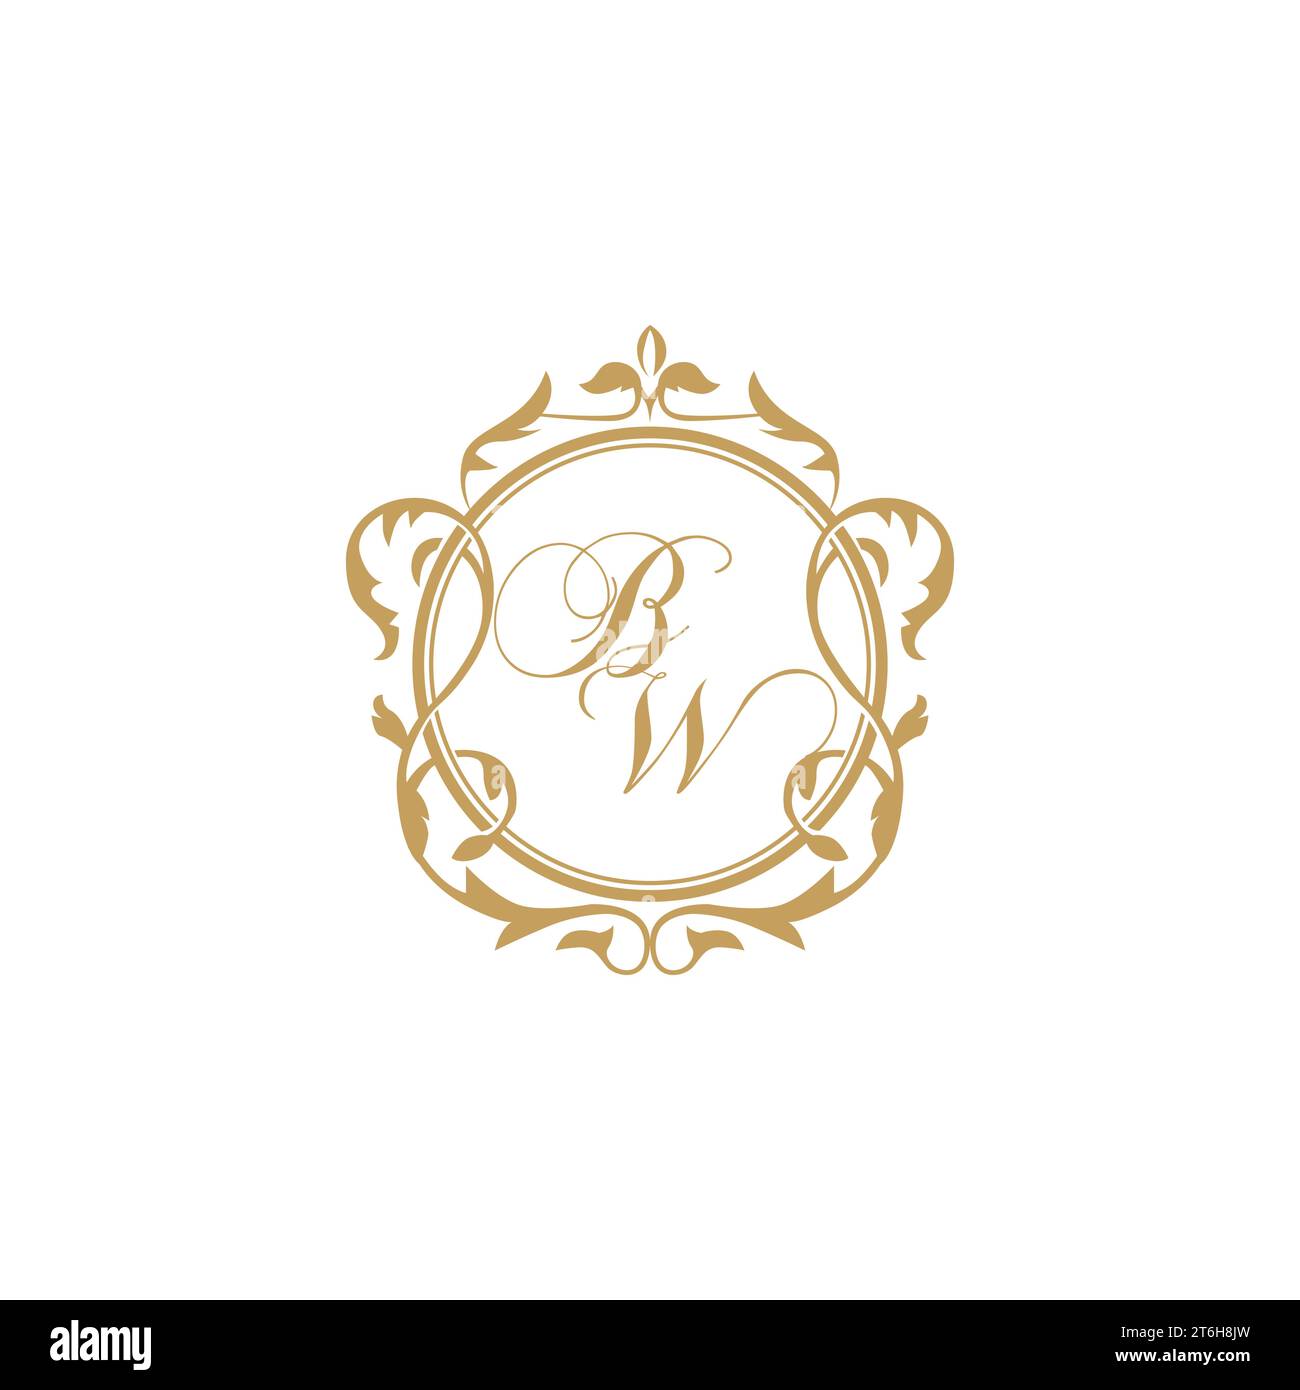 BW Wedding initials invitation with elegant ornament circle element vector graphic template Stock Vector